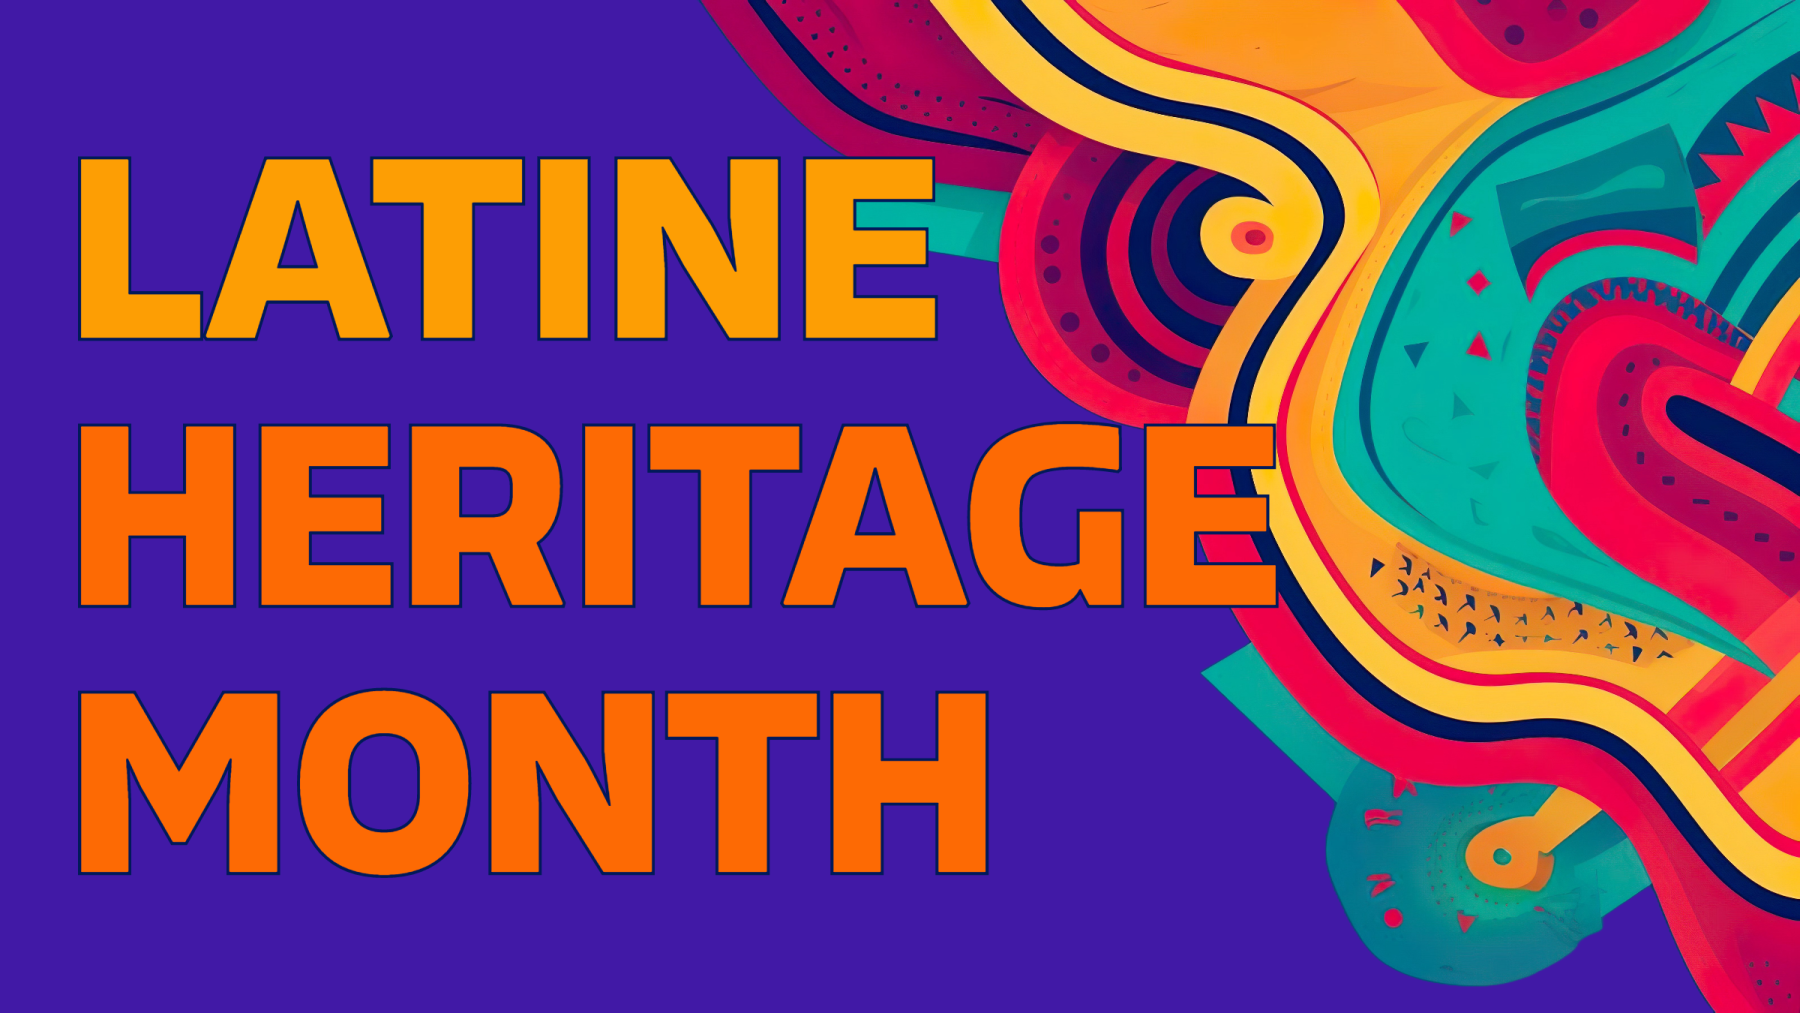 Purple background with "Latine Heritage Month" in big block letters of a gradient orange, yellow color and swiggles of colors (teal, yellow, red, orange) on the right side 